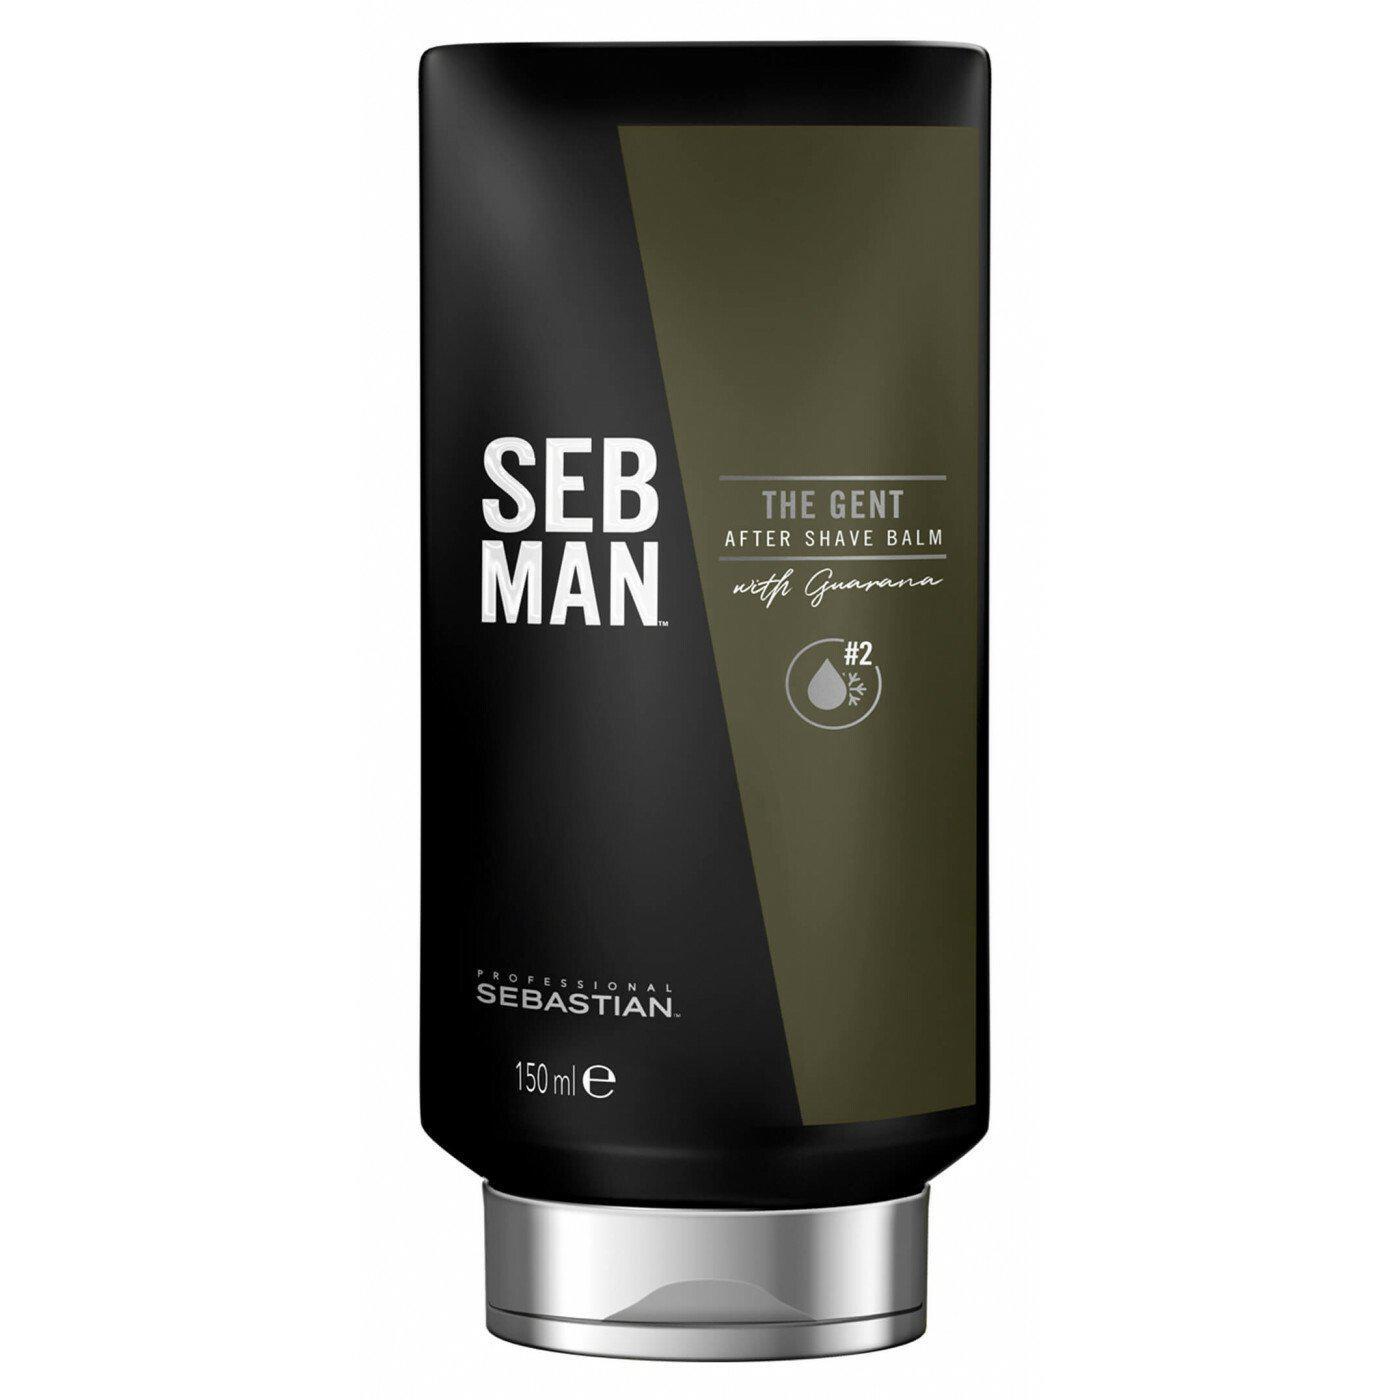 Seb Man The Gent After Shave Balm 150ml